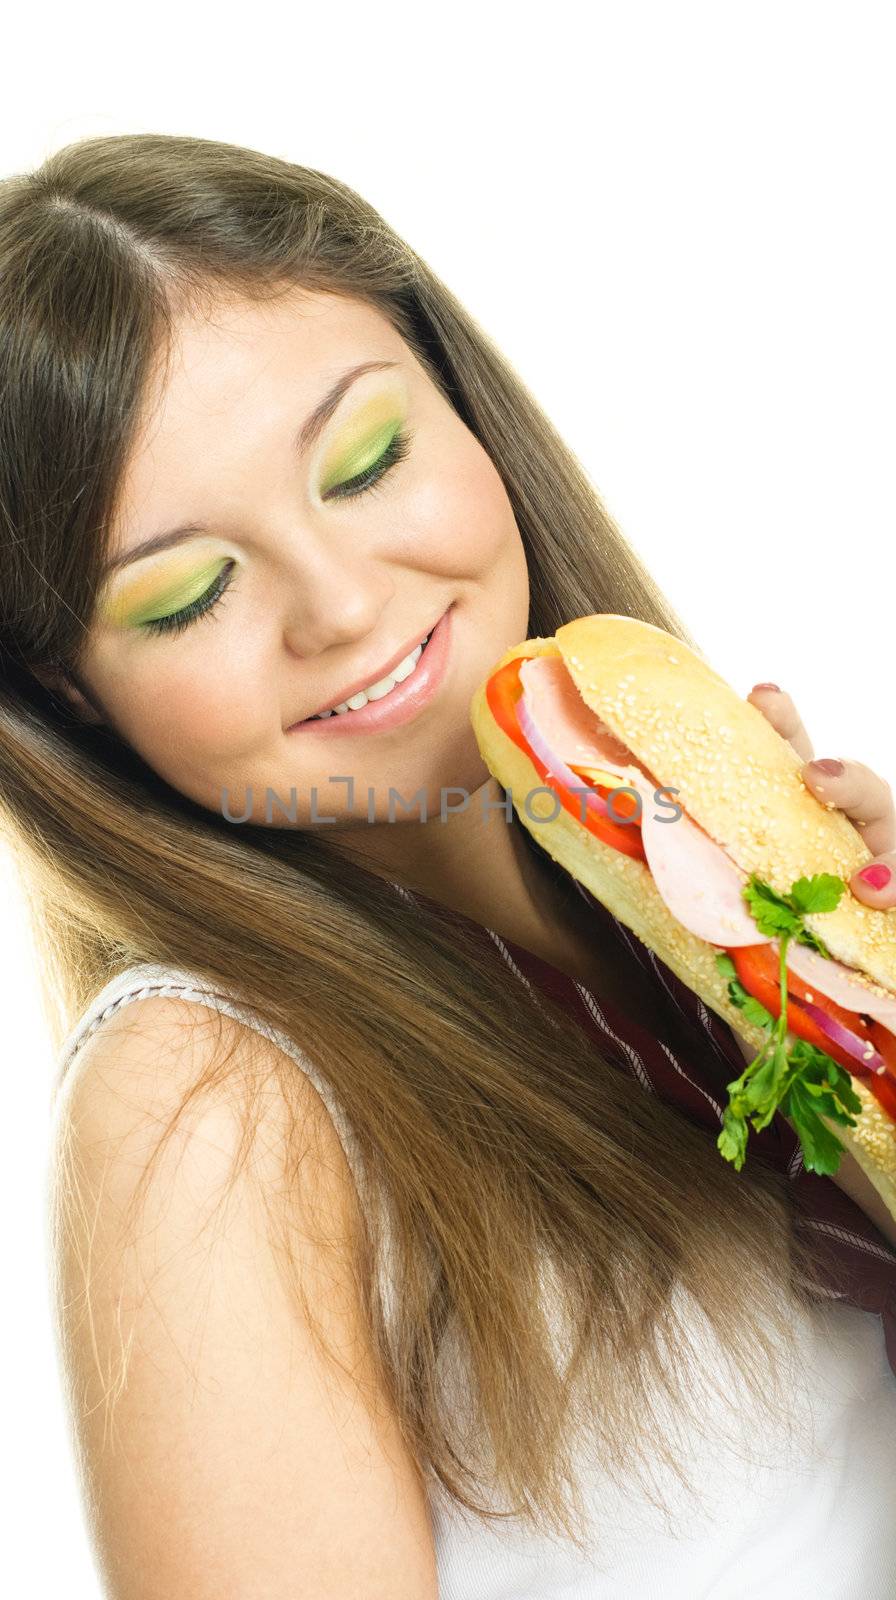 pretty young brunette woman eating a sandwich, isolated against white background